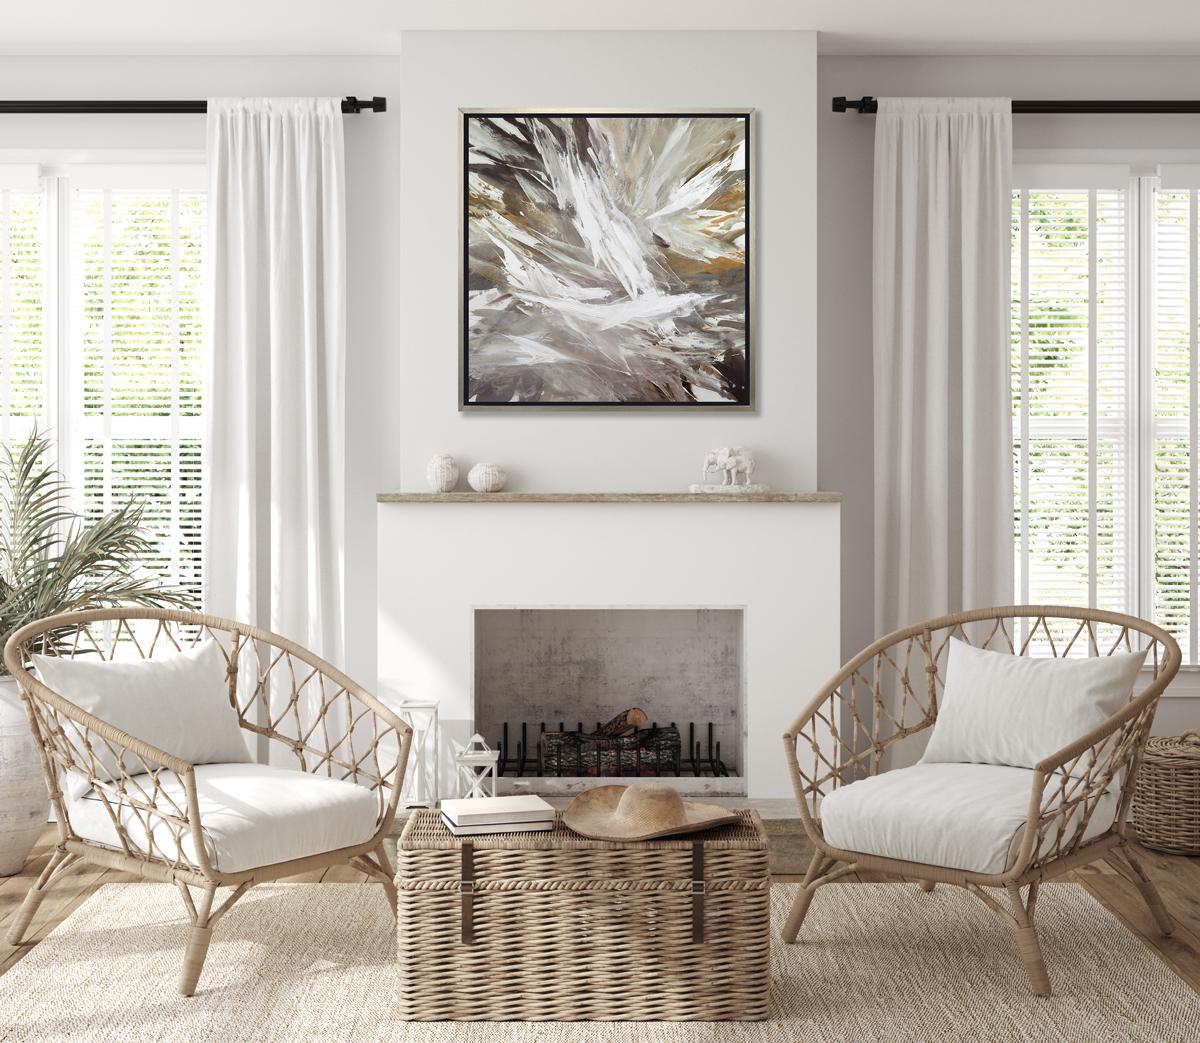 This abstract limited edition print by Teodora Guererra features a warm, neutral palette. Layers of charcoal, grey, gold, and white colors in large, broad strokes sweep out from the center of the composition creating a flowing movement and energy.